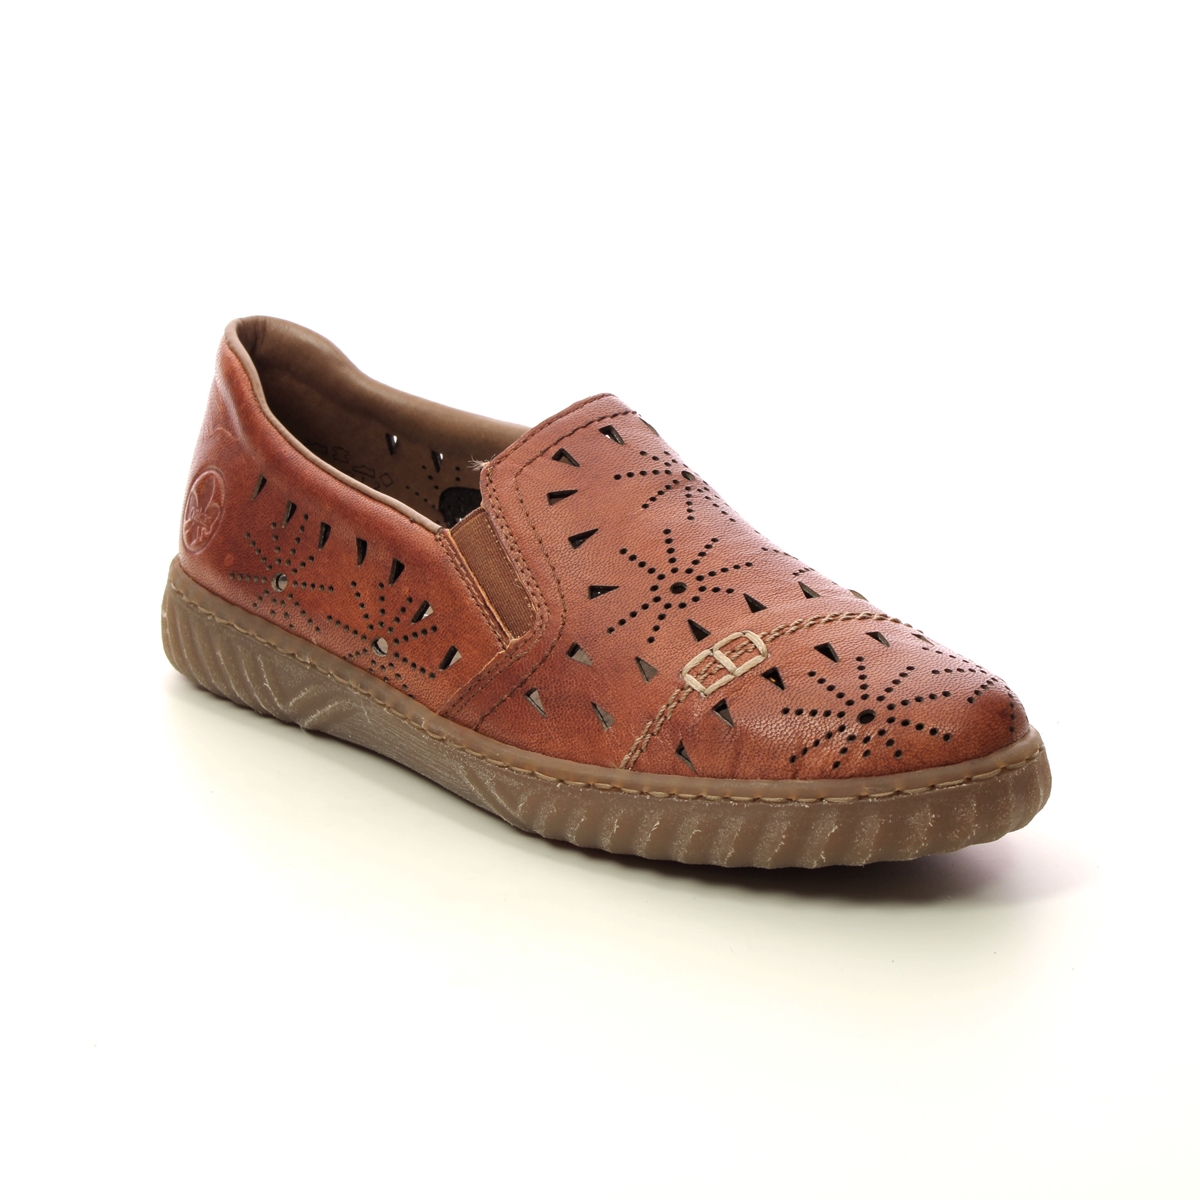 Rieker Roselle Tan Leather Womens Comfort Slip On Shoes N0967-22 In Size 39 In Plain Tan Leather